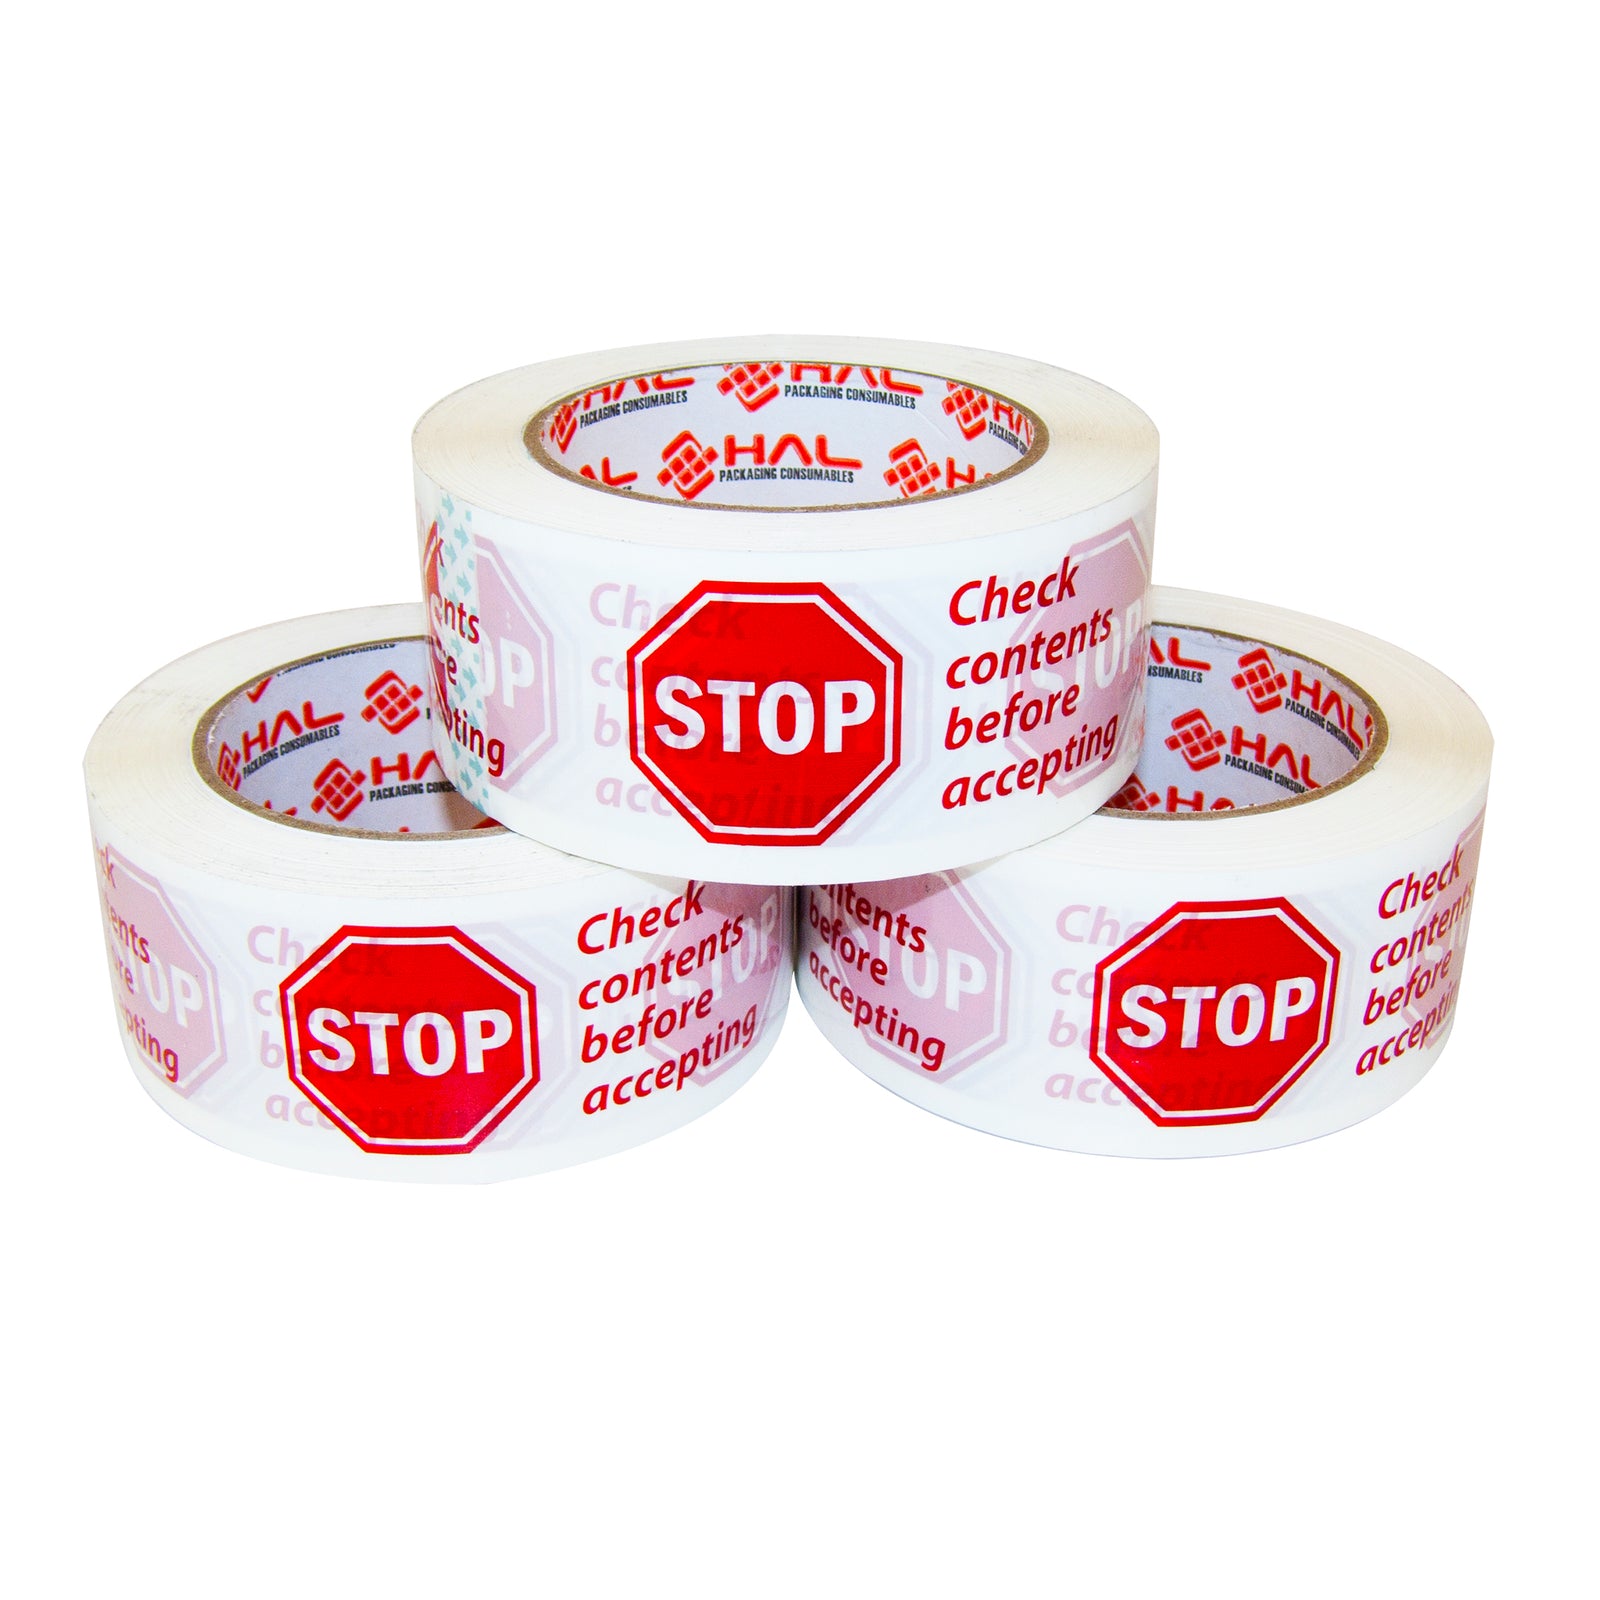 three white rolls of packaging tape with red stop sign and check contents before accepting message stacked.